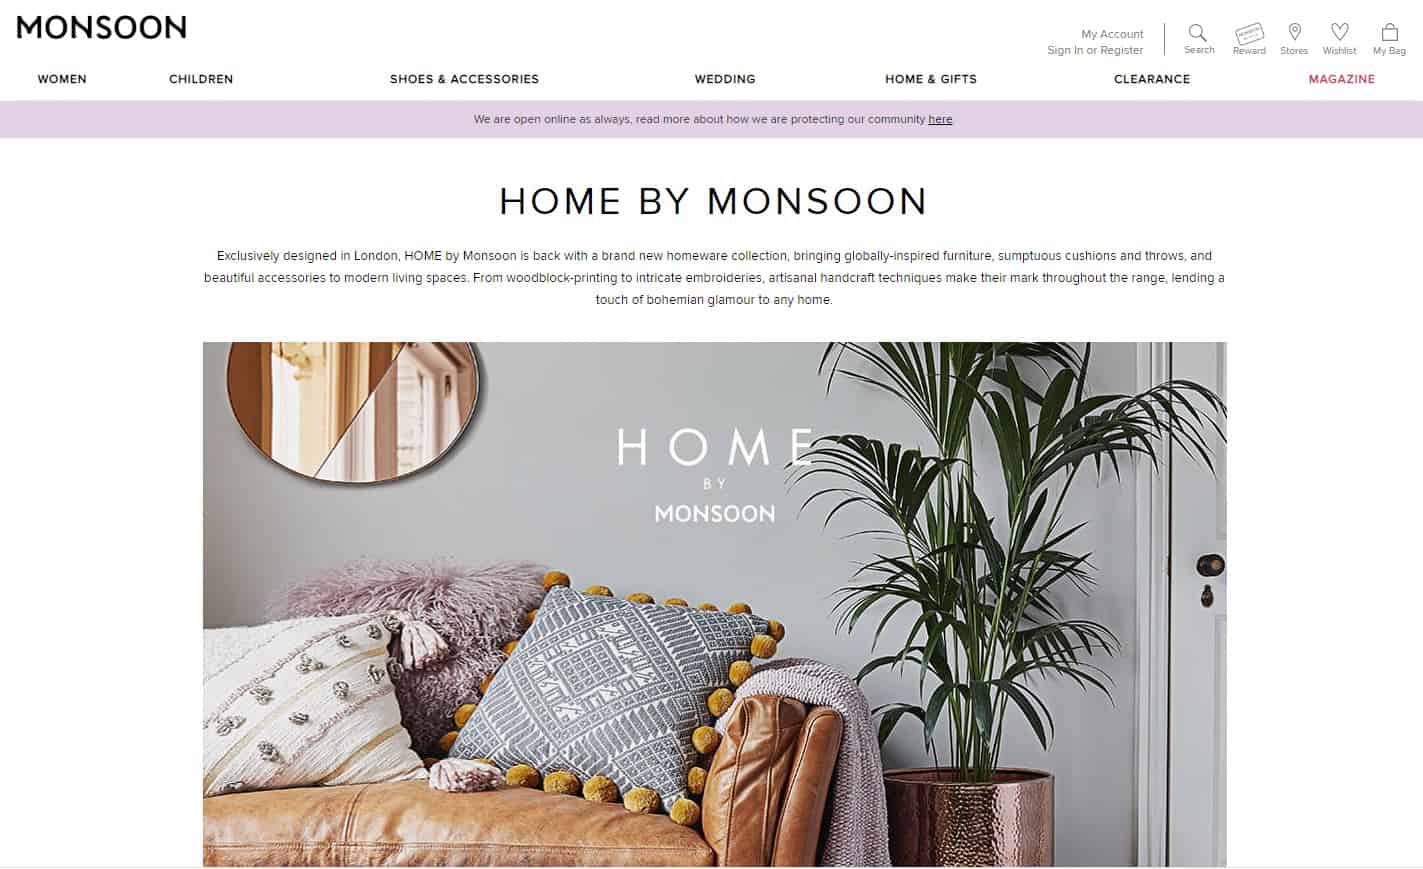 Monsoon experiences increase in website dwell time